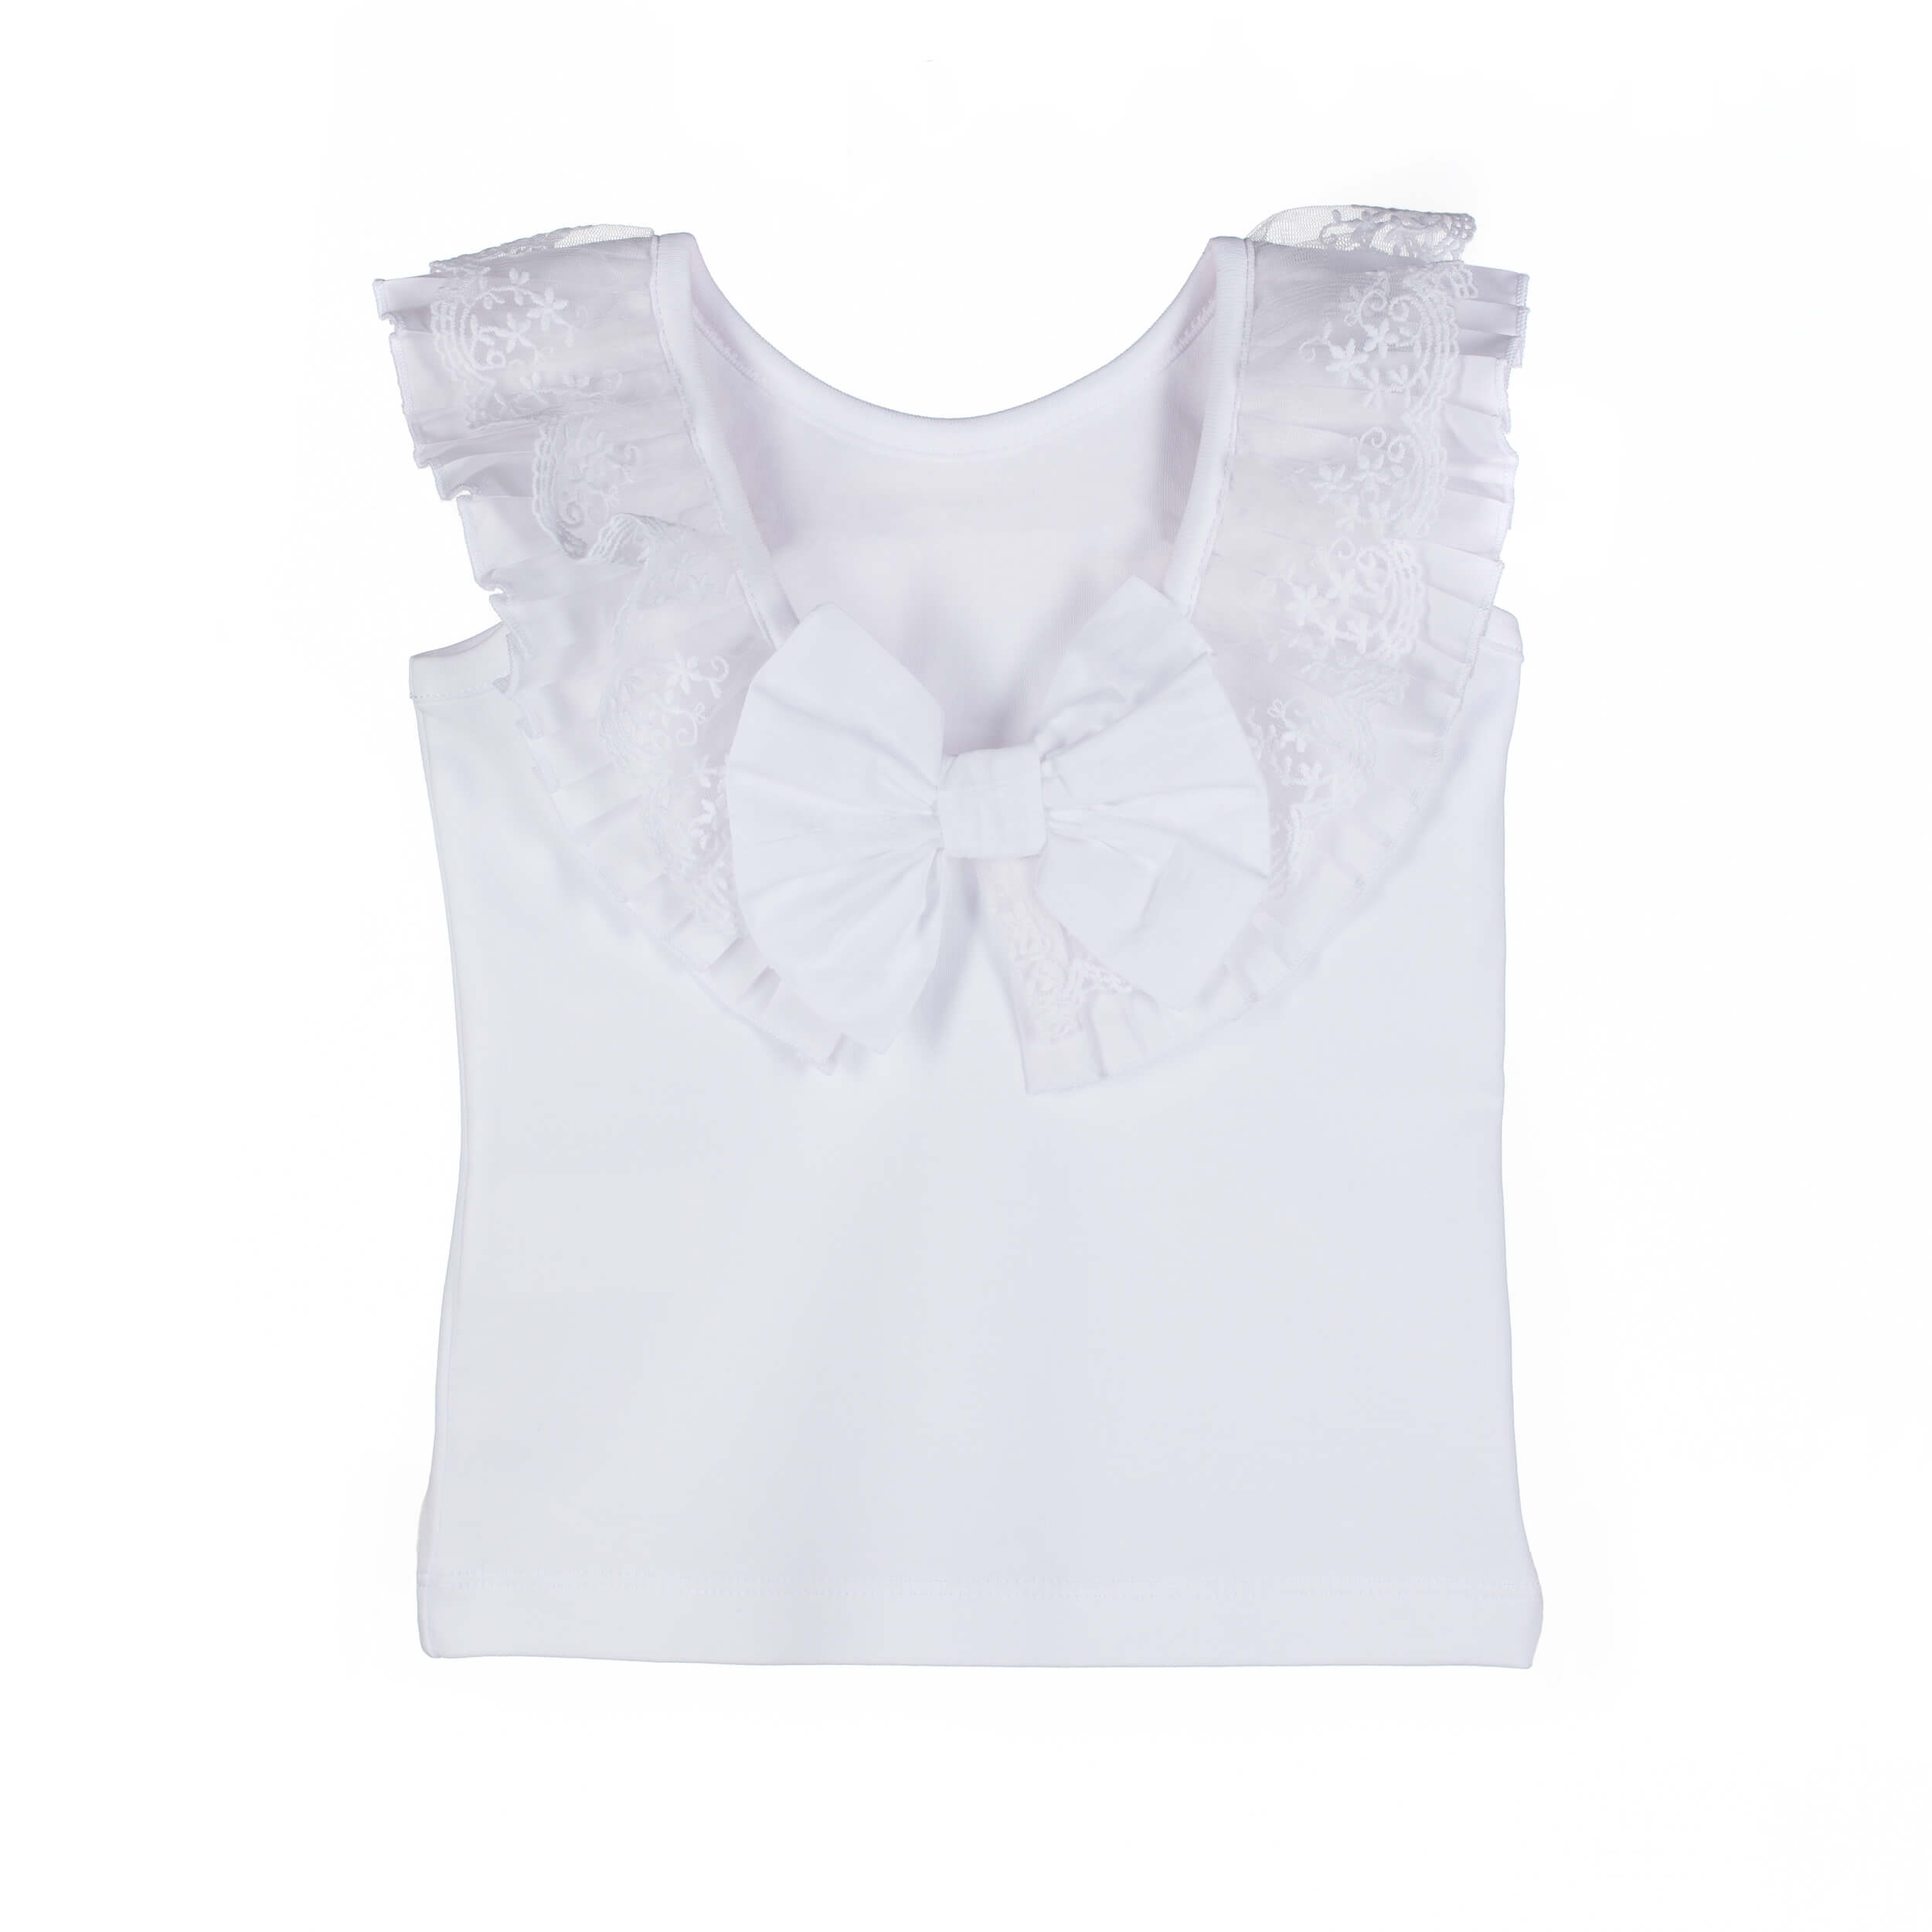 sleeveless girls top with lace